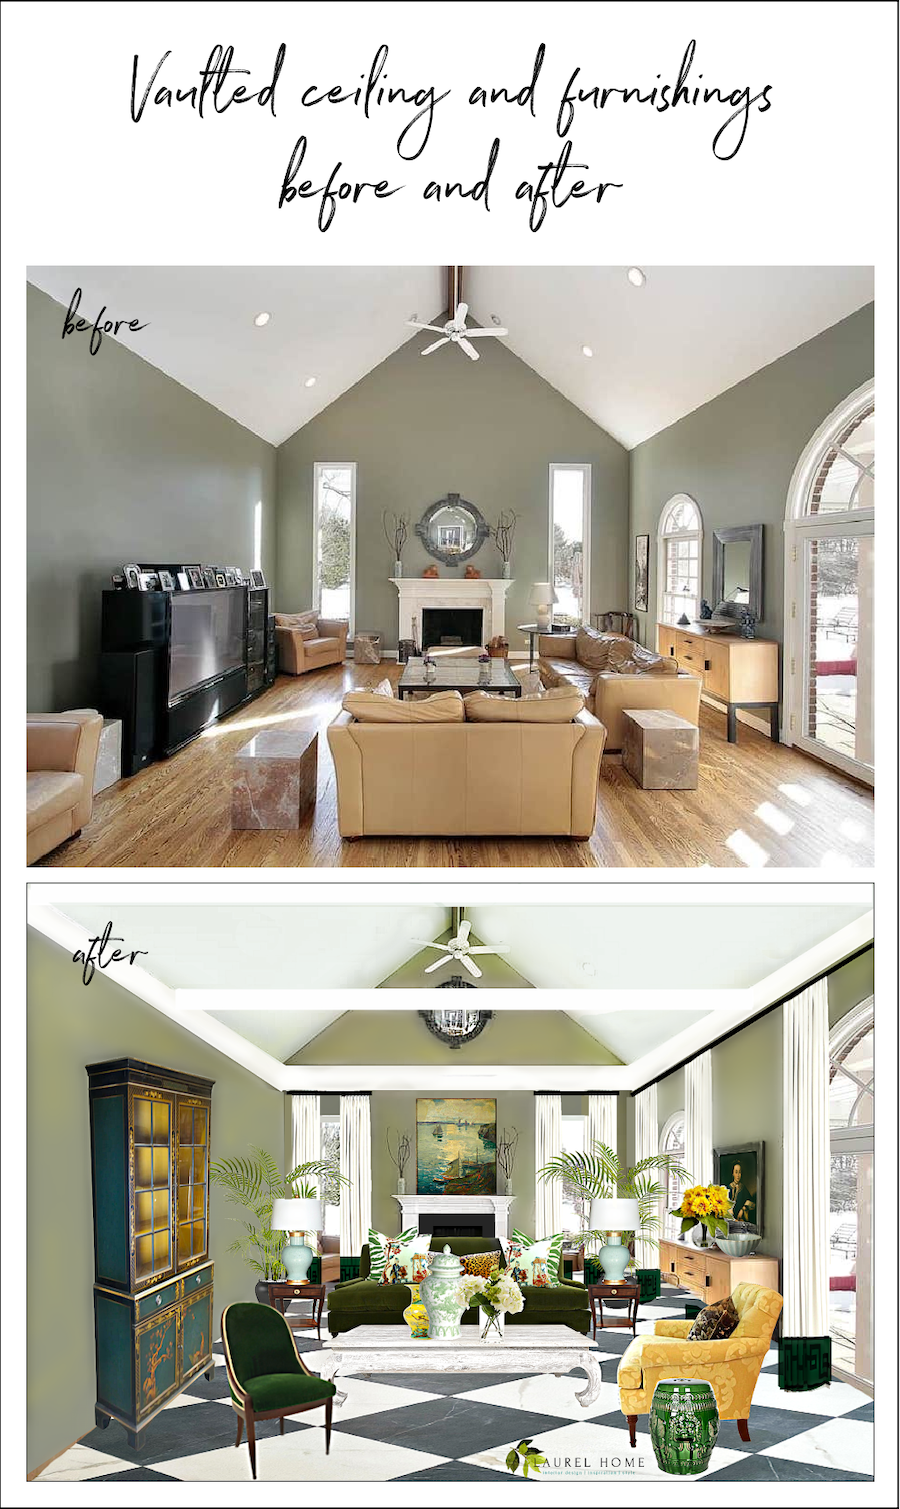 vaulted ceiling and furnishings before and after